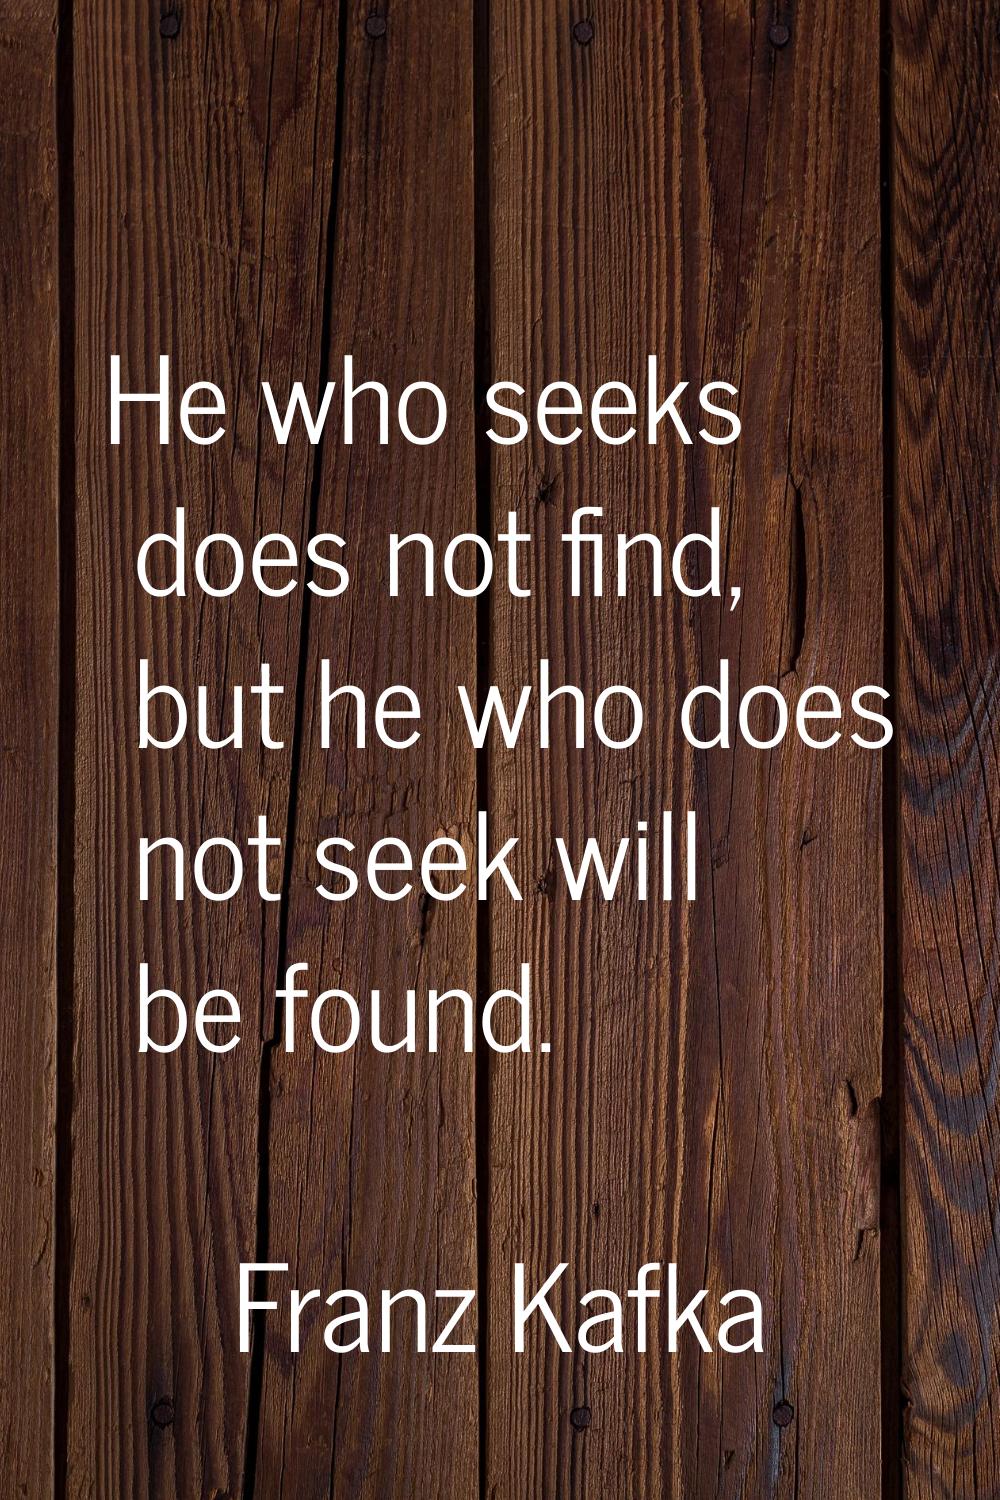 He who seeks does not find, but he who does not seek will be found.